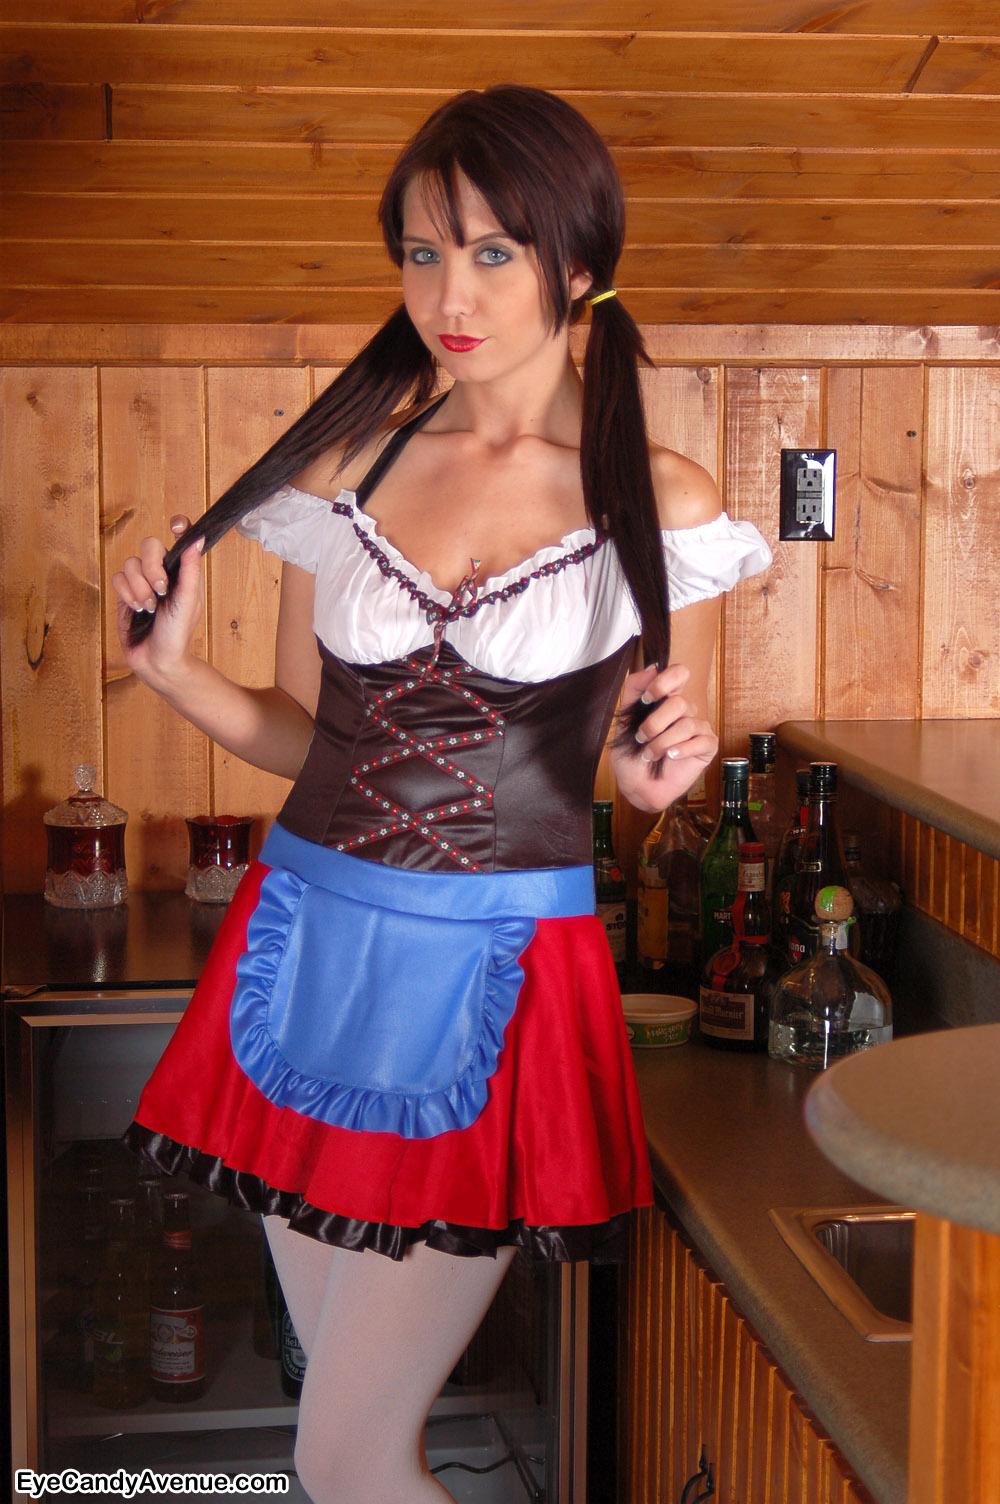 Chrissy Marie dresses up as a super hot german barmaid #53805770